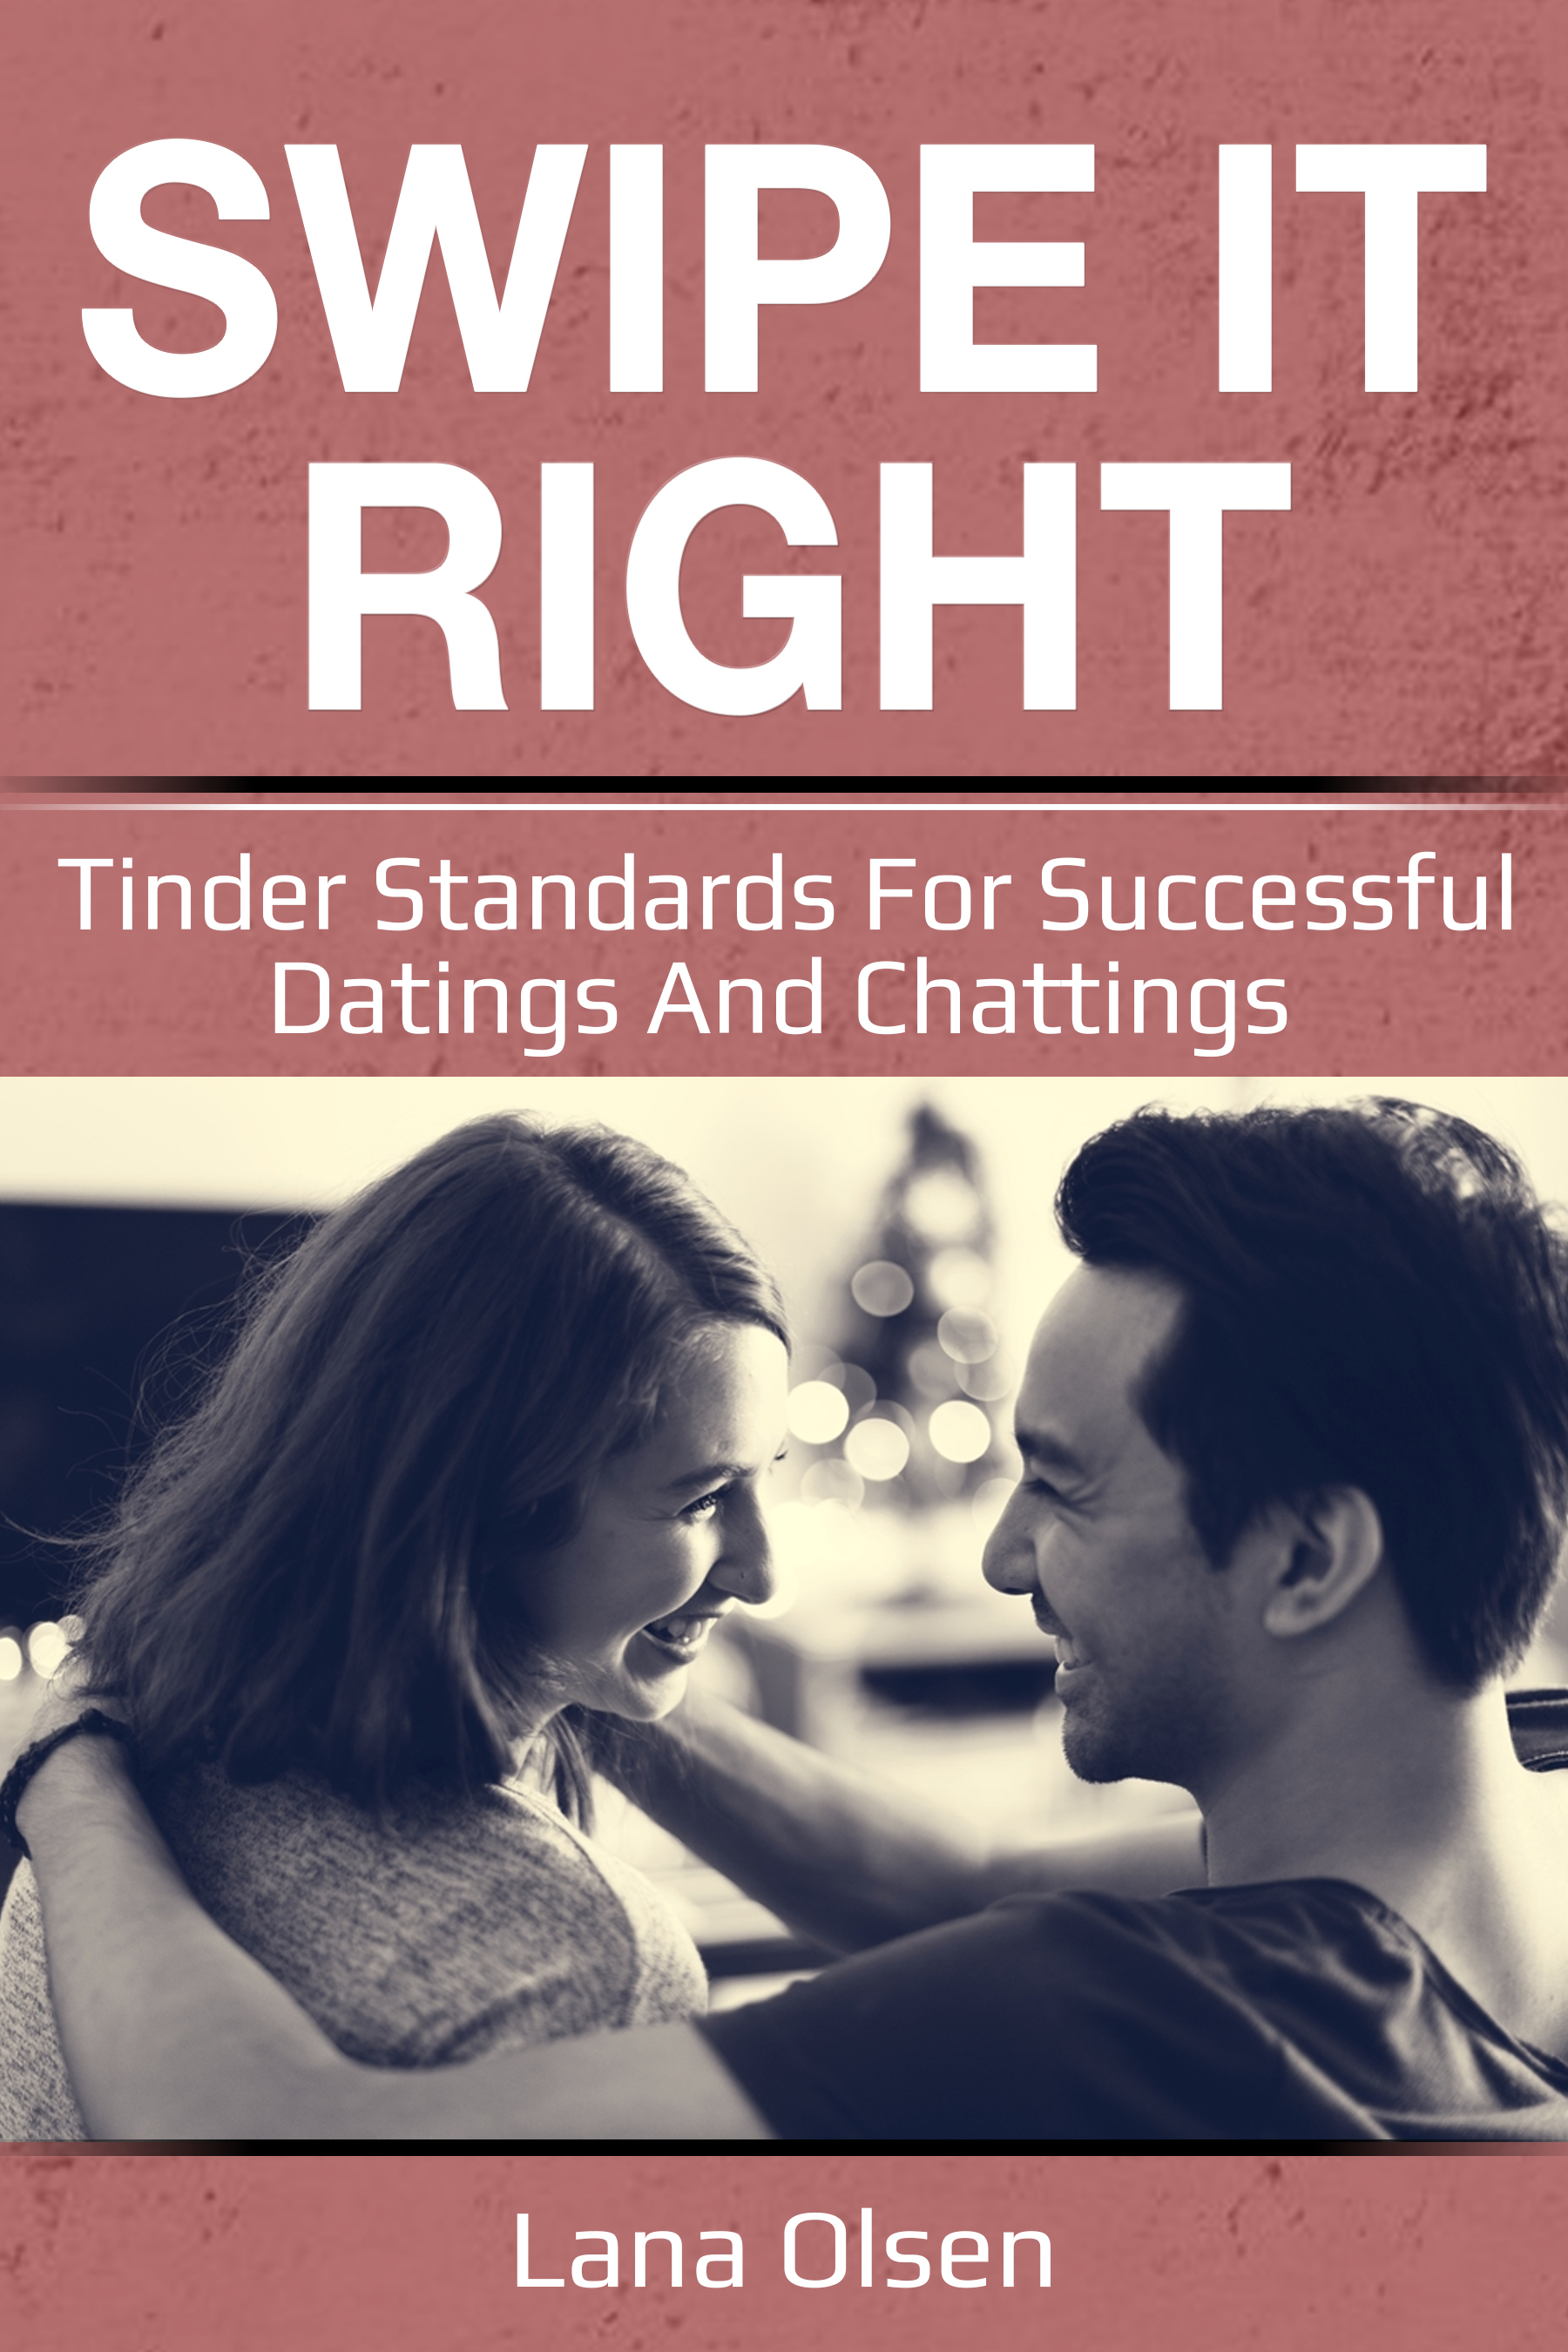 FREE: Swipe It Right: Tinder Standarts for Succesfull Datings and Chatting by Lana Olsen